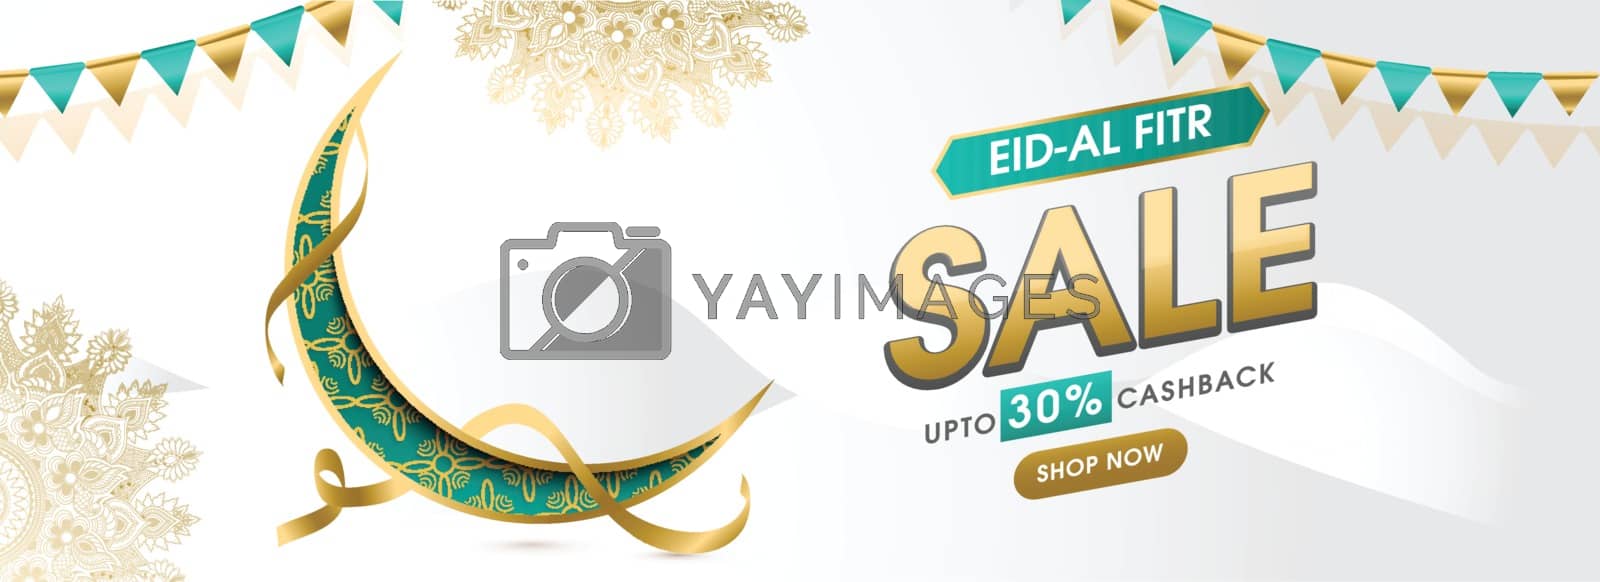 Royalty free image of Eid- Al-Fitr sale header or banner design with 30% cashback offe by aispl